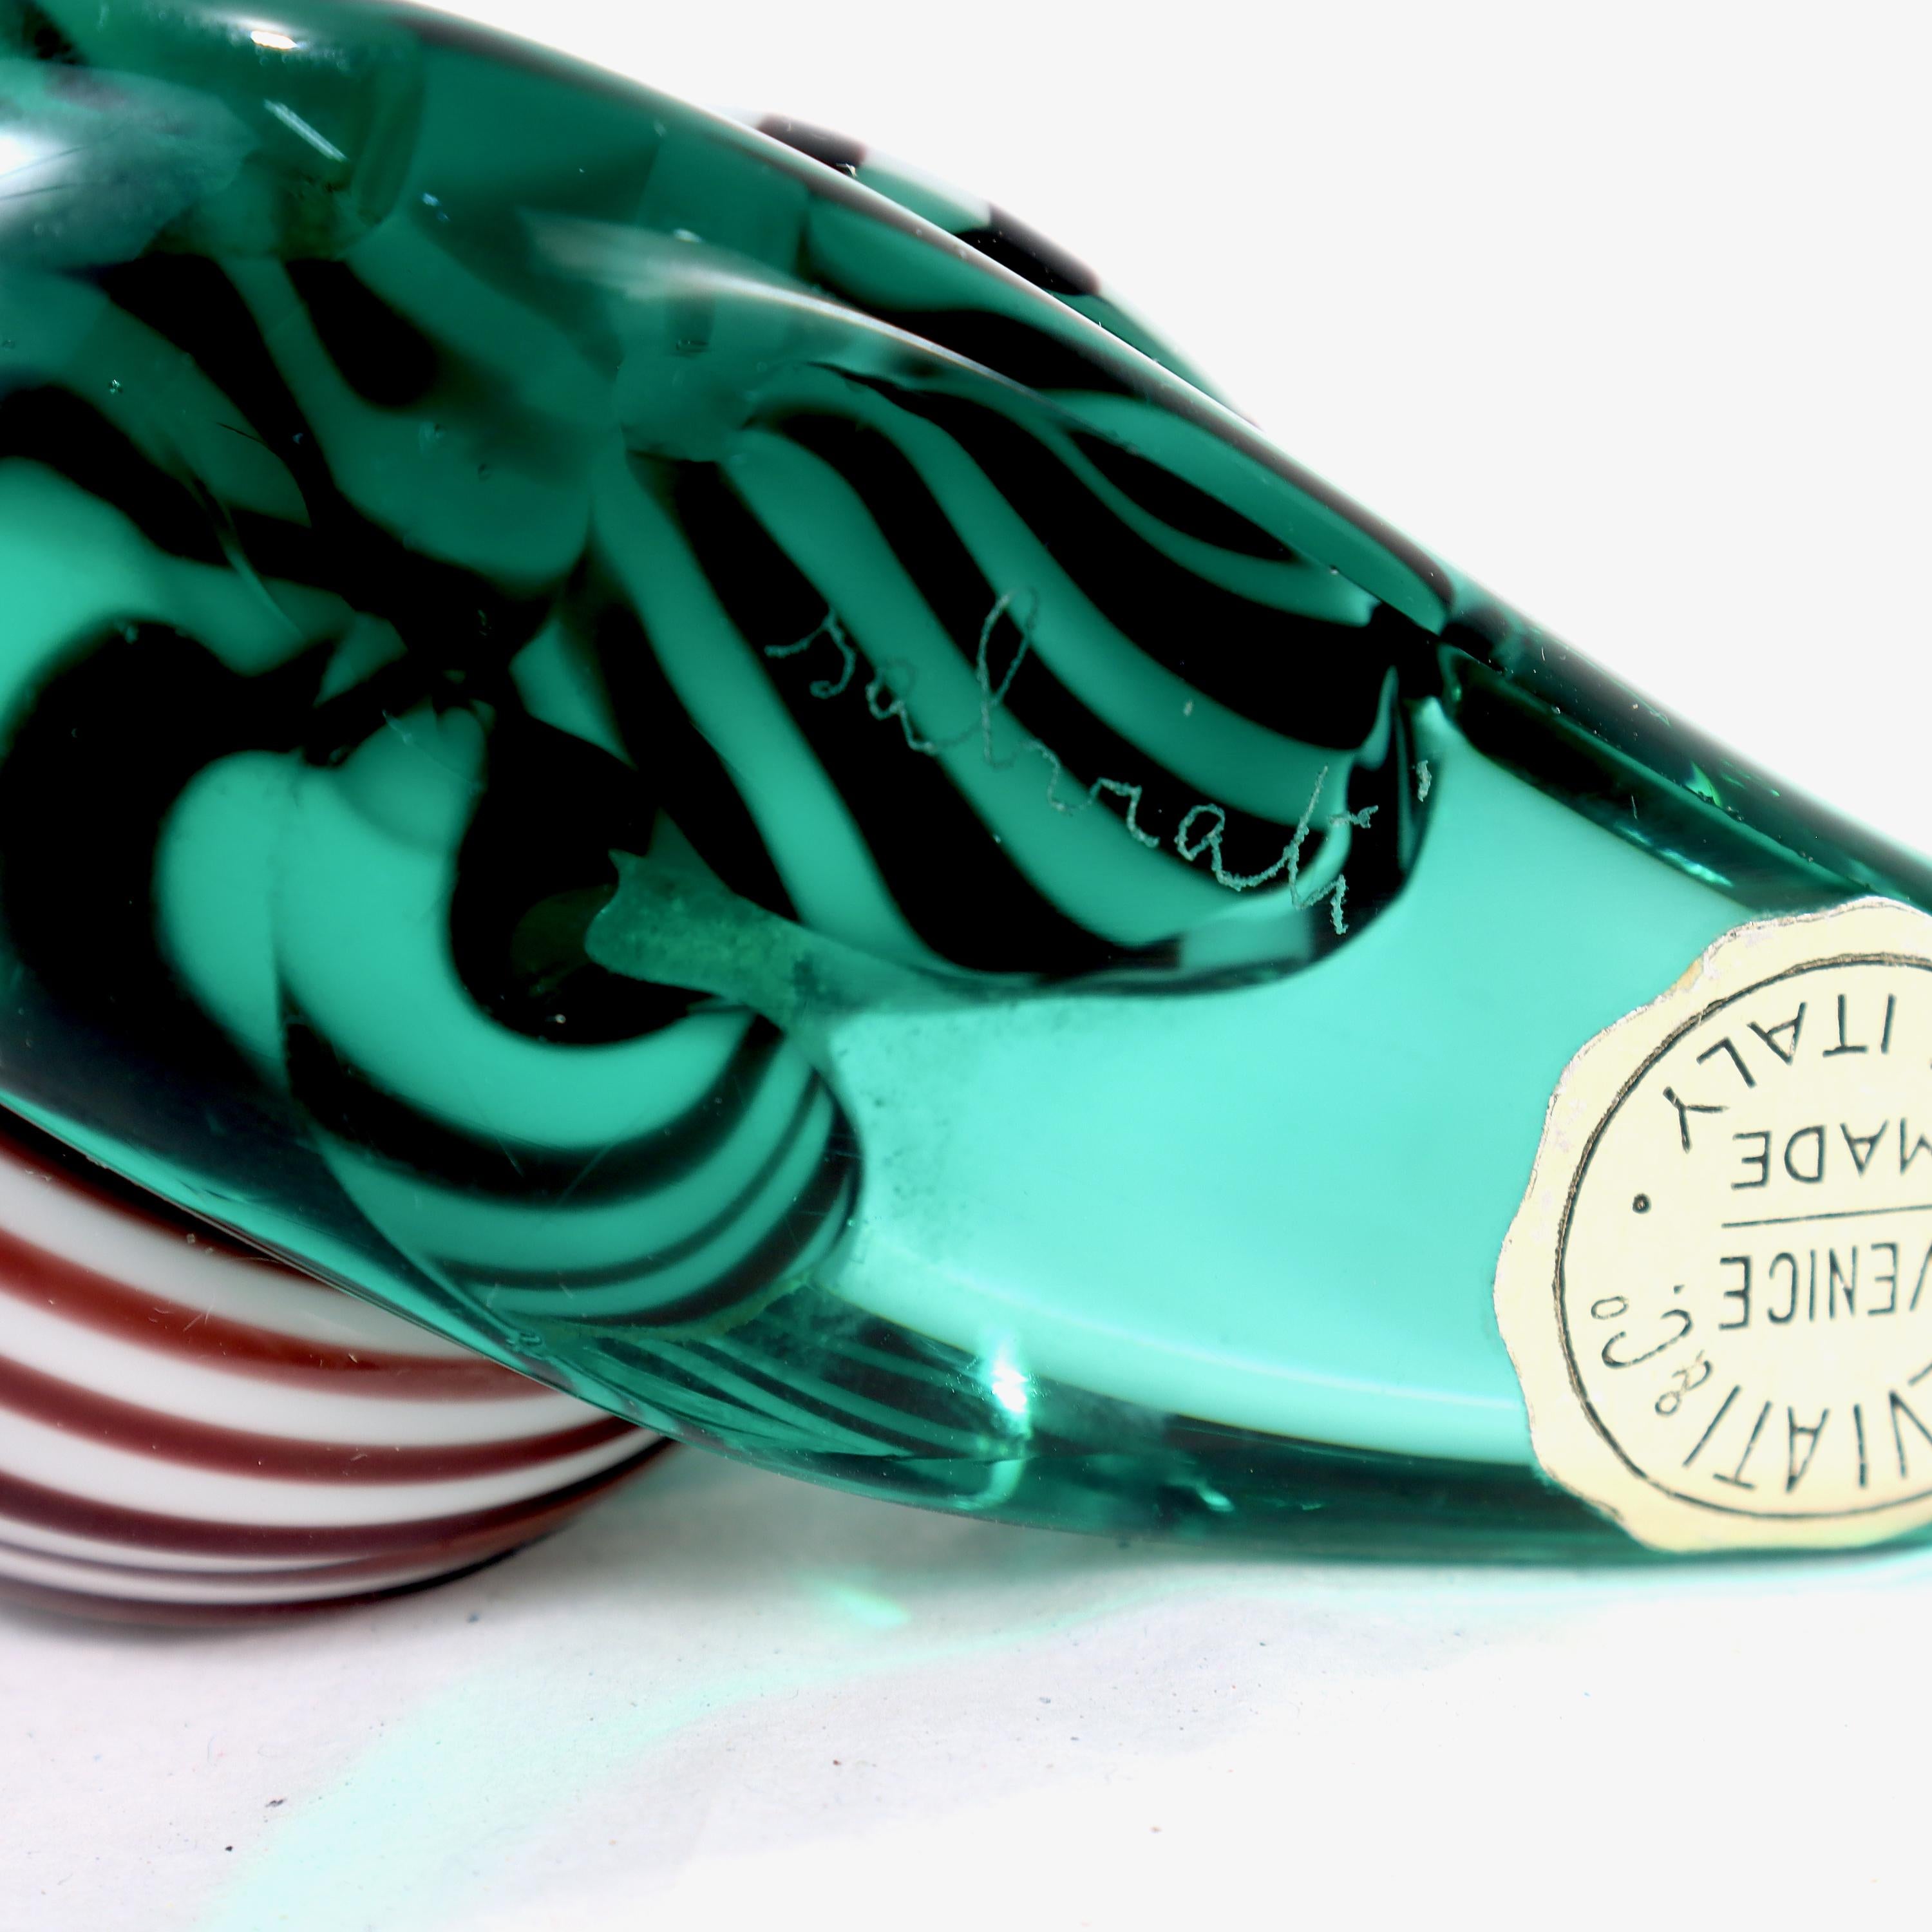 Signed & Labeled Salviati Venetian / Murano Art Glass Snail Paperweight Figurine For Sale 4